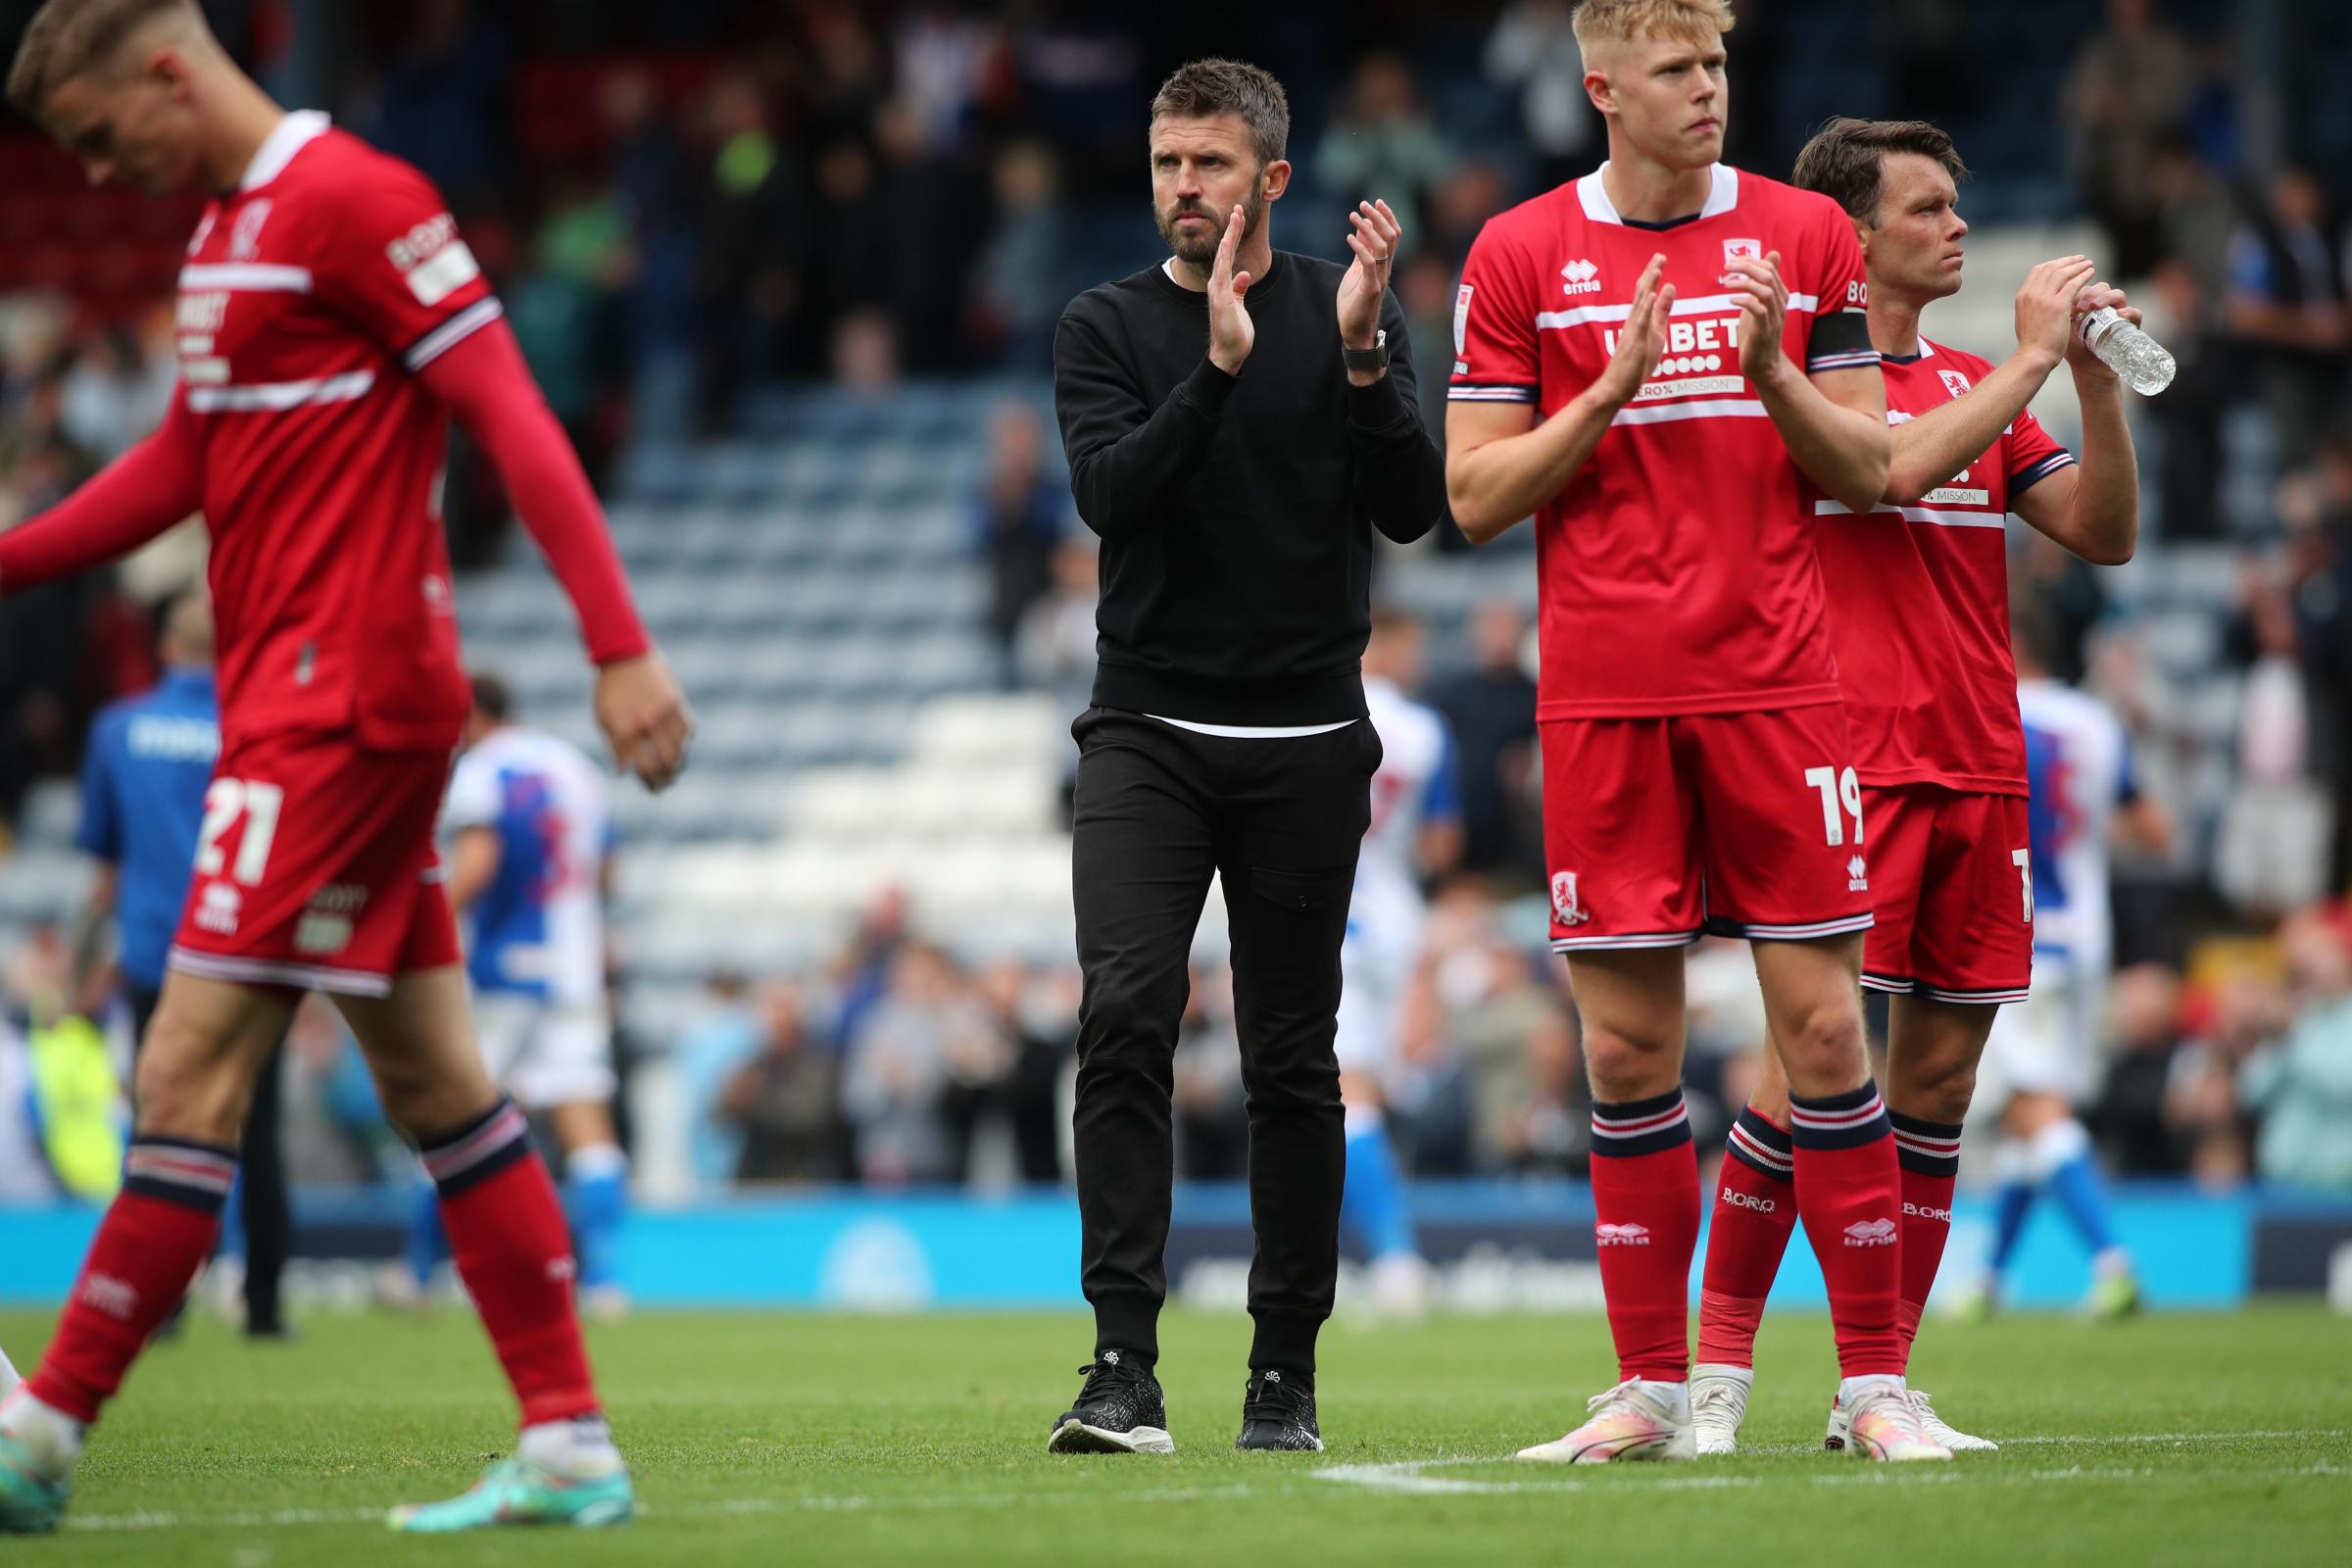 Middlesbrough plagued by familiar issues at Blackburn